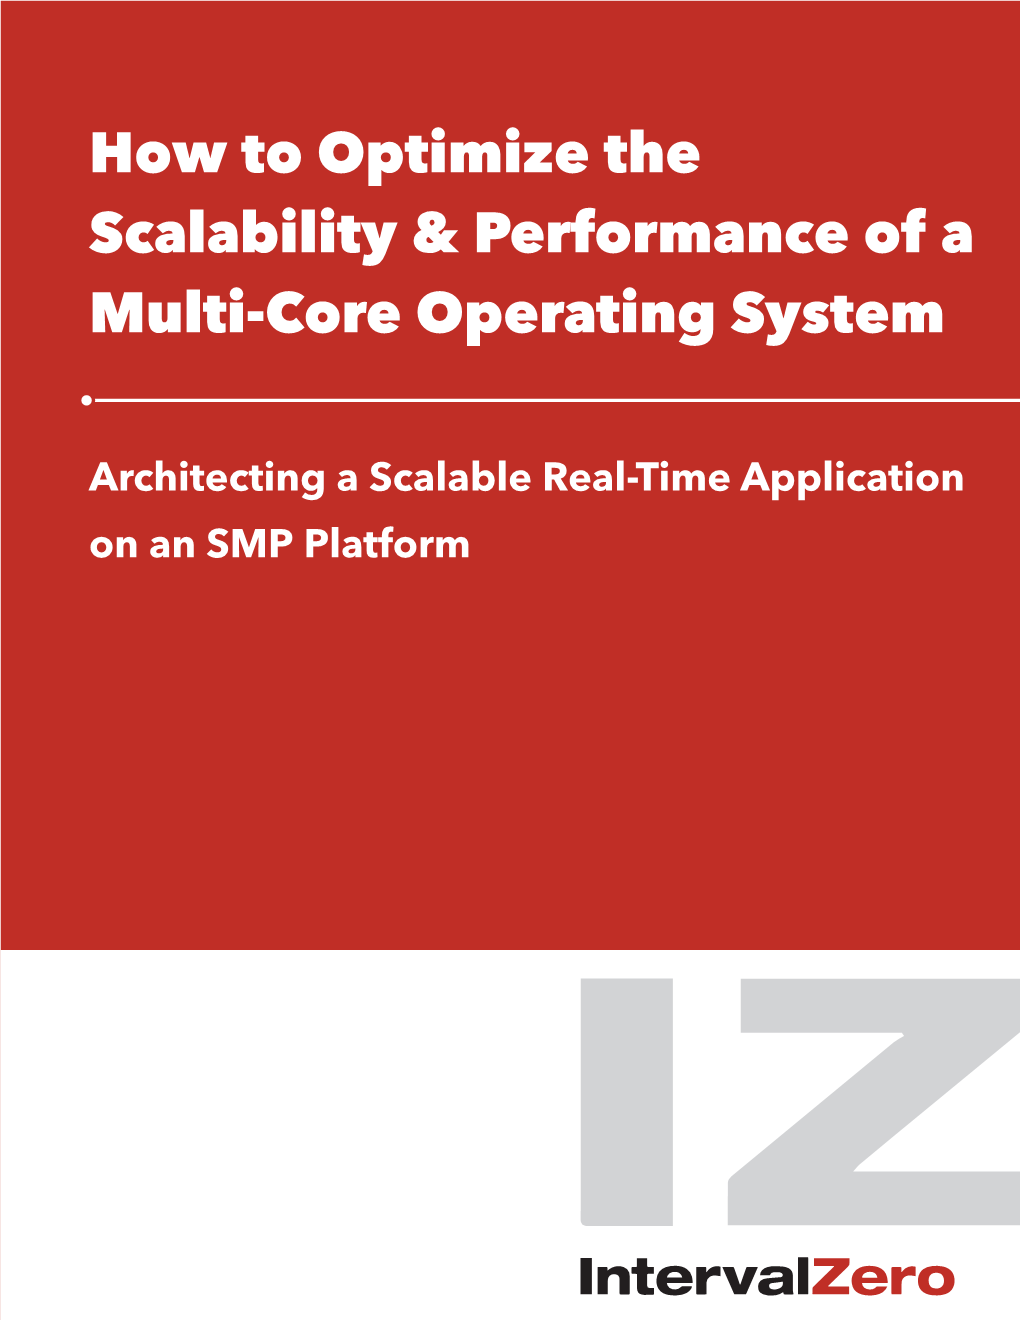 How to Optimize the Scalability & Performance of a Multi-Core